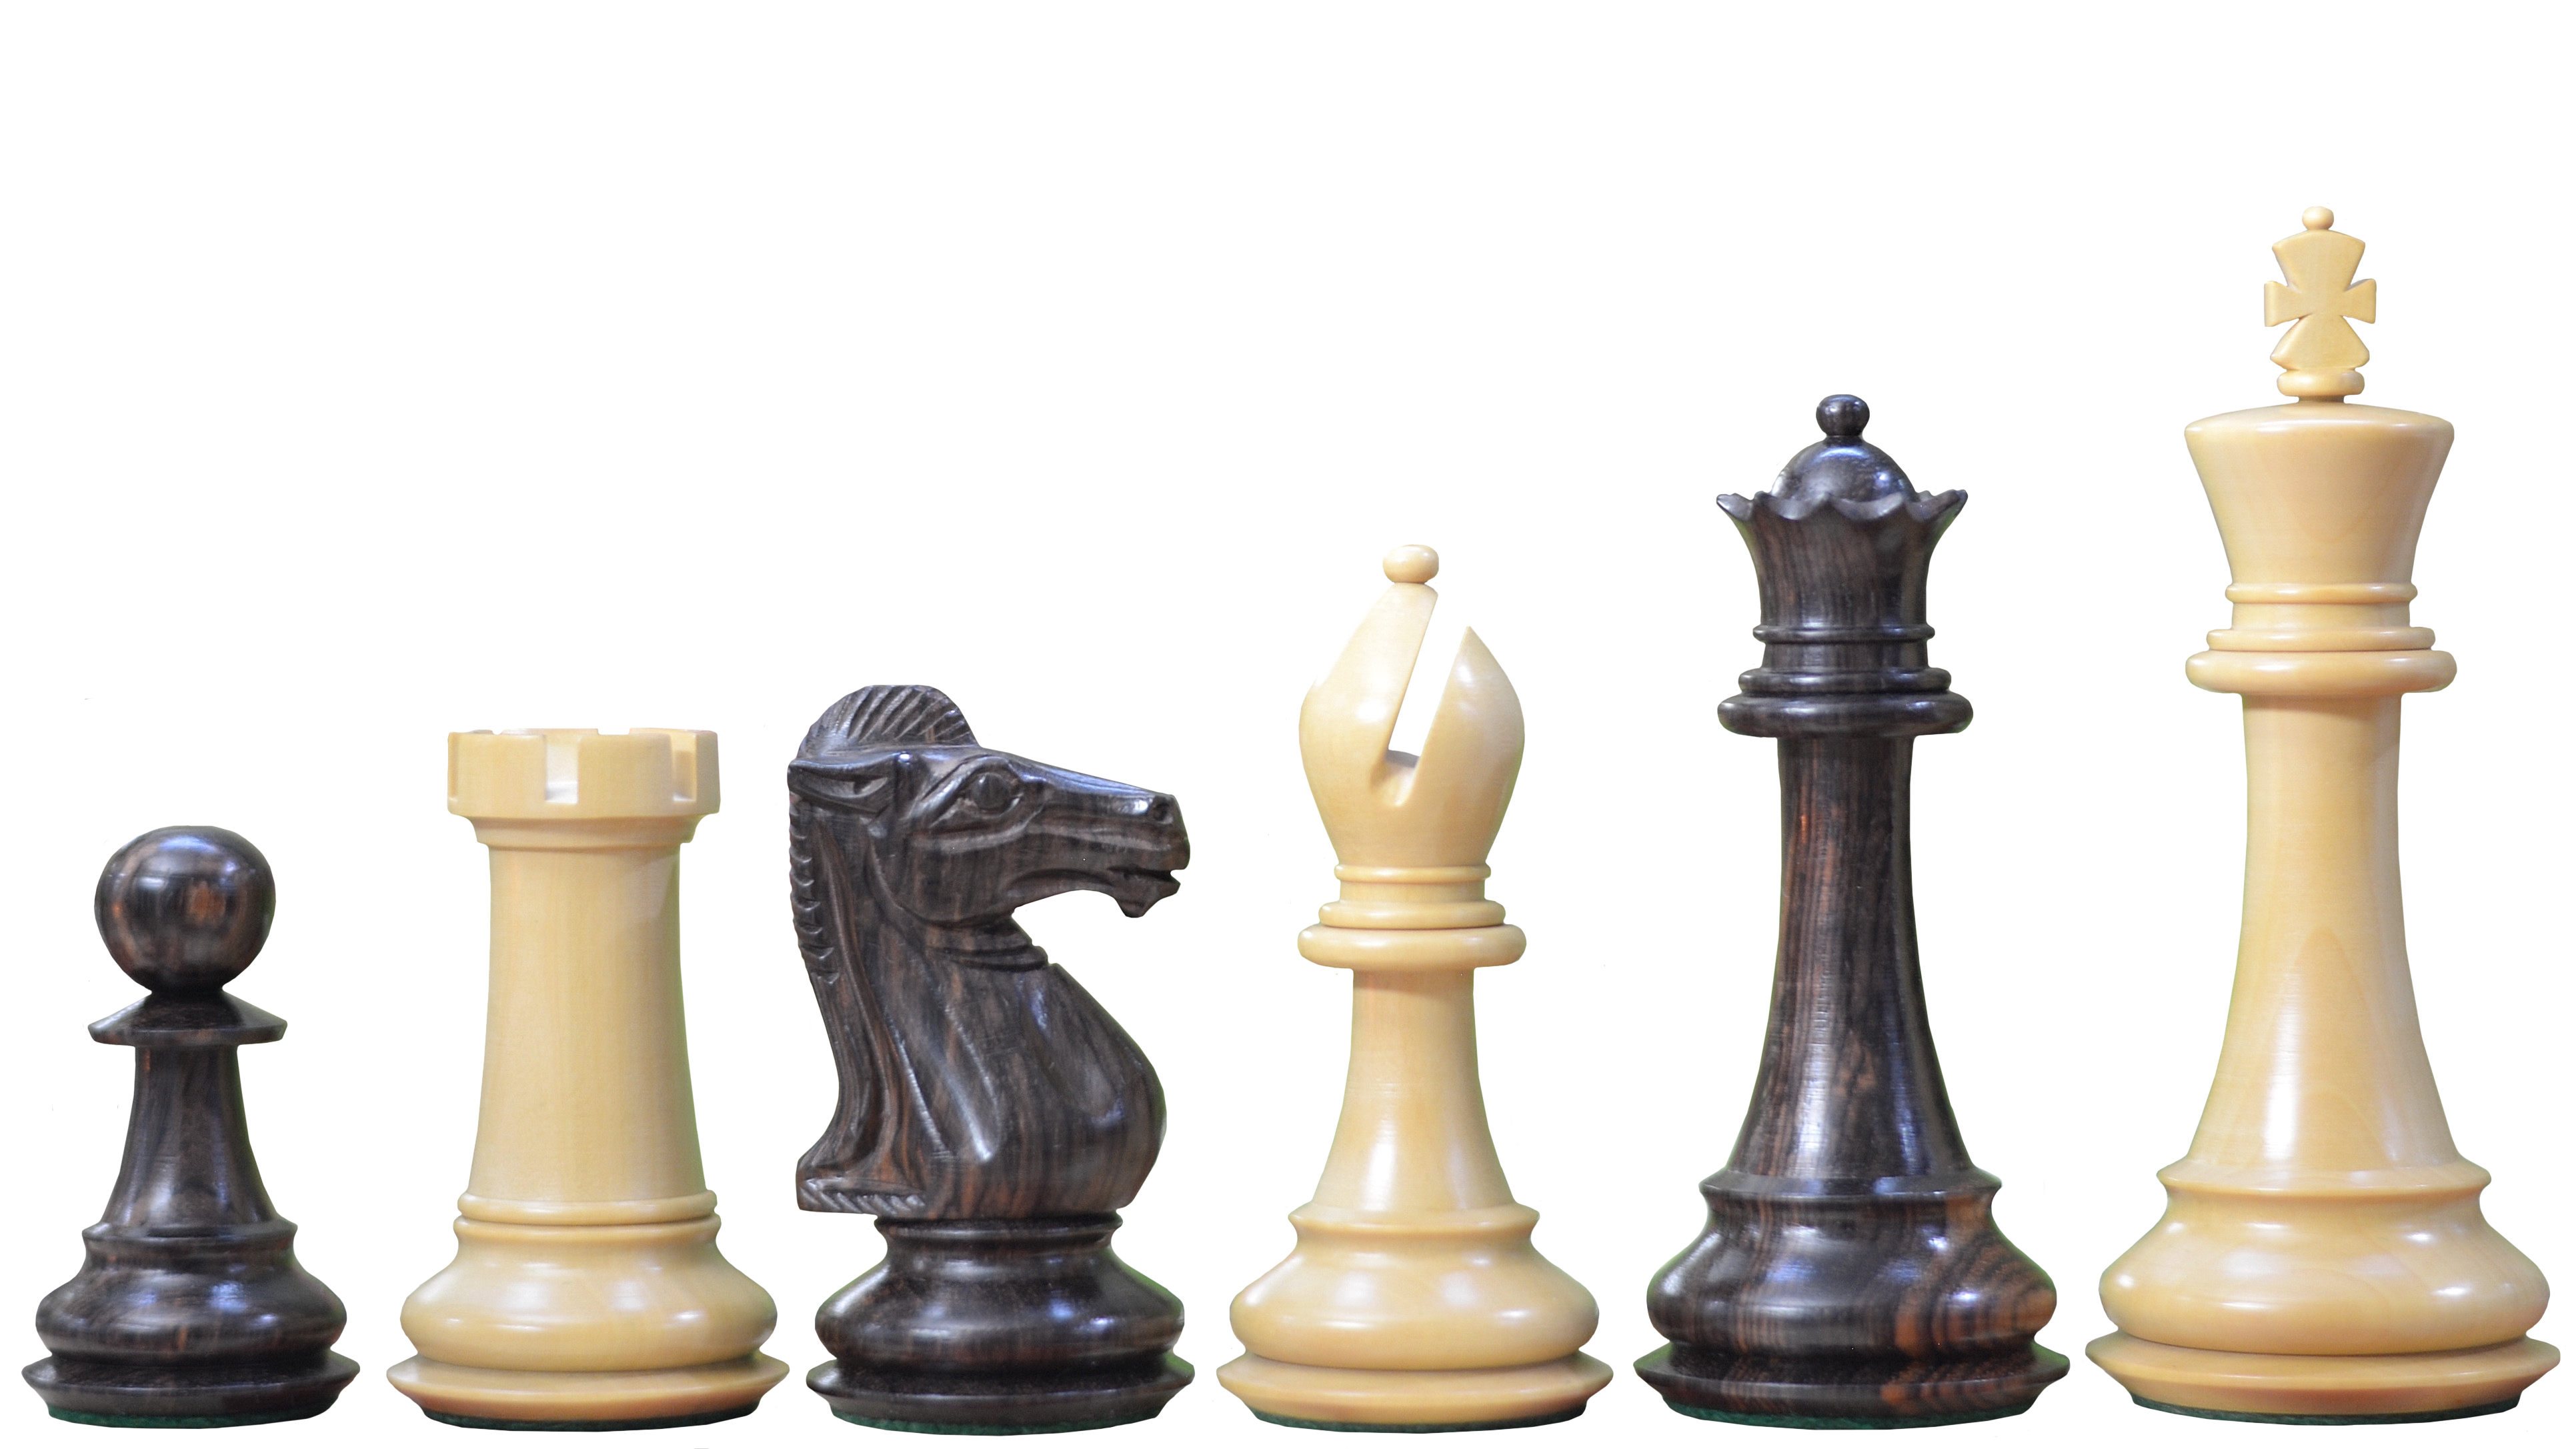 Wooden Chess Board PNG Images & PSDs for Download